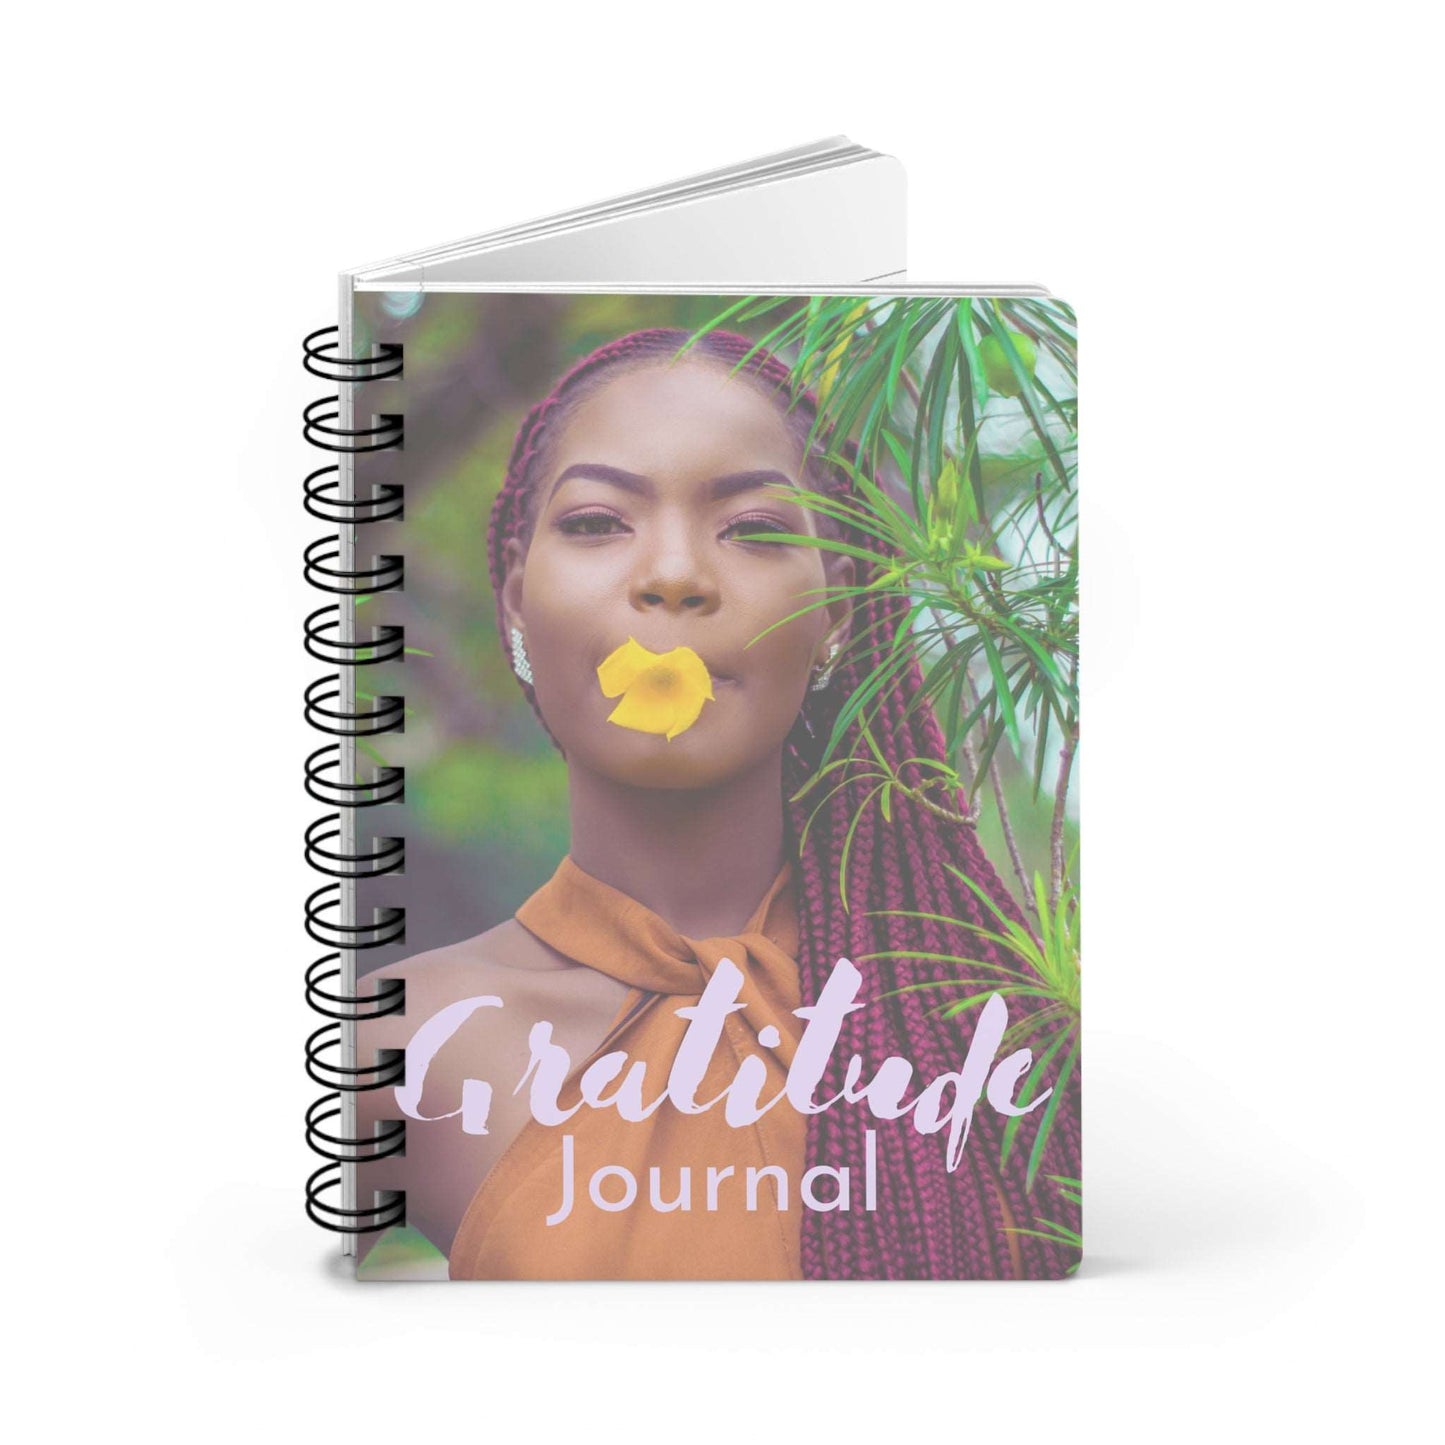 A spiral notebook with the product name "Gratitude Journal : A Journal For Women" on it, perfect for a gratitude journal.